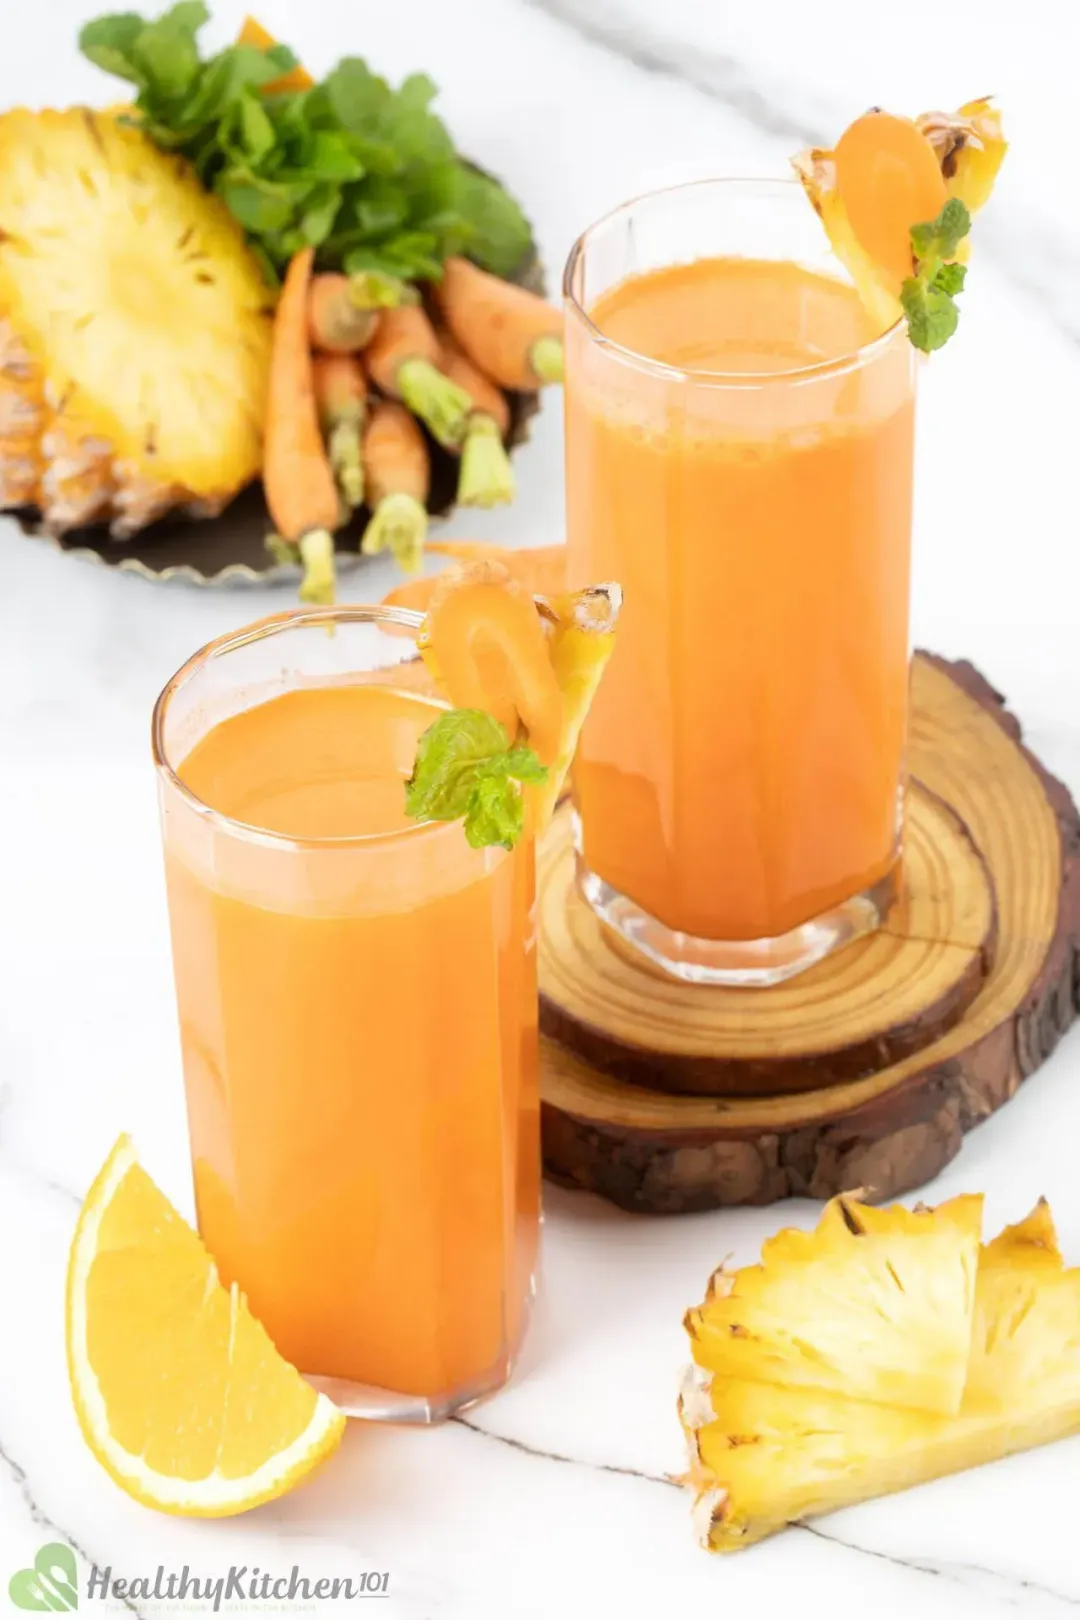 Two tall glasses of carrot orange drinks garnished with pieces of orange, pineapples, and carrots